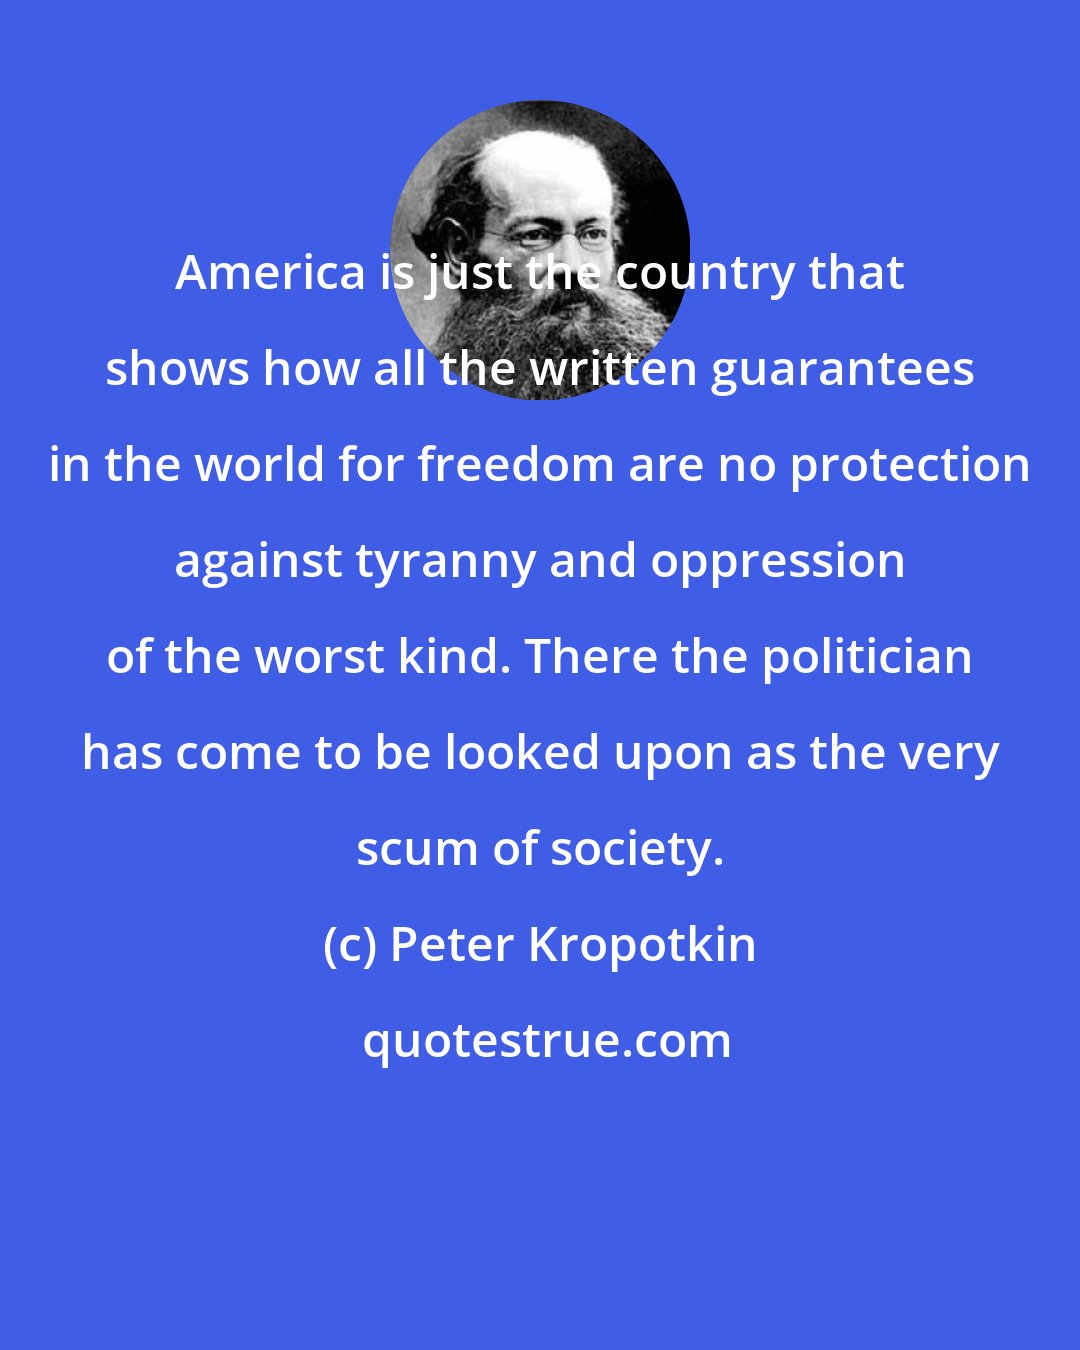 Peter Kropotkin: America is just the country that shows how all the written guarantees in the world for freedom are no protection against tyranny and oppression of the worst kind. There the politician has come to be looked upon as the very scum of society.